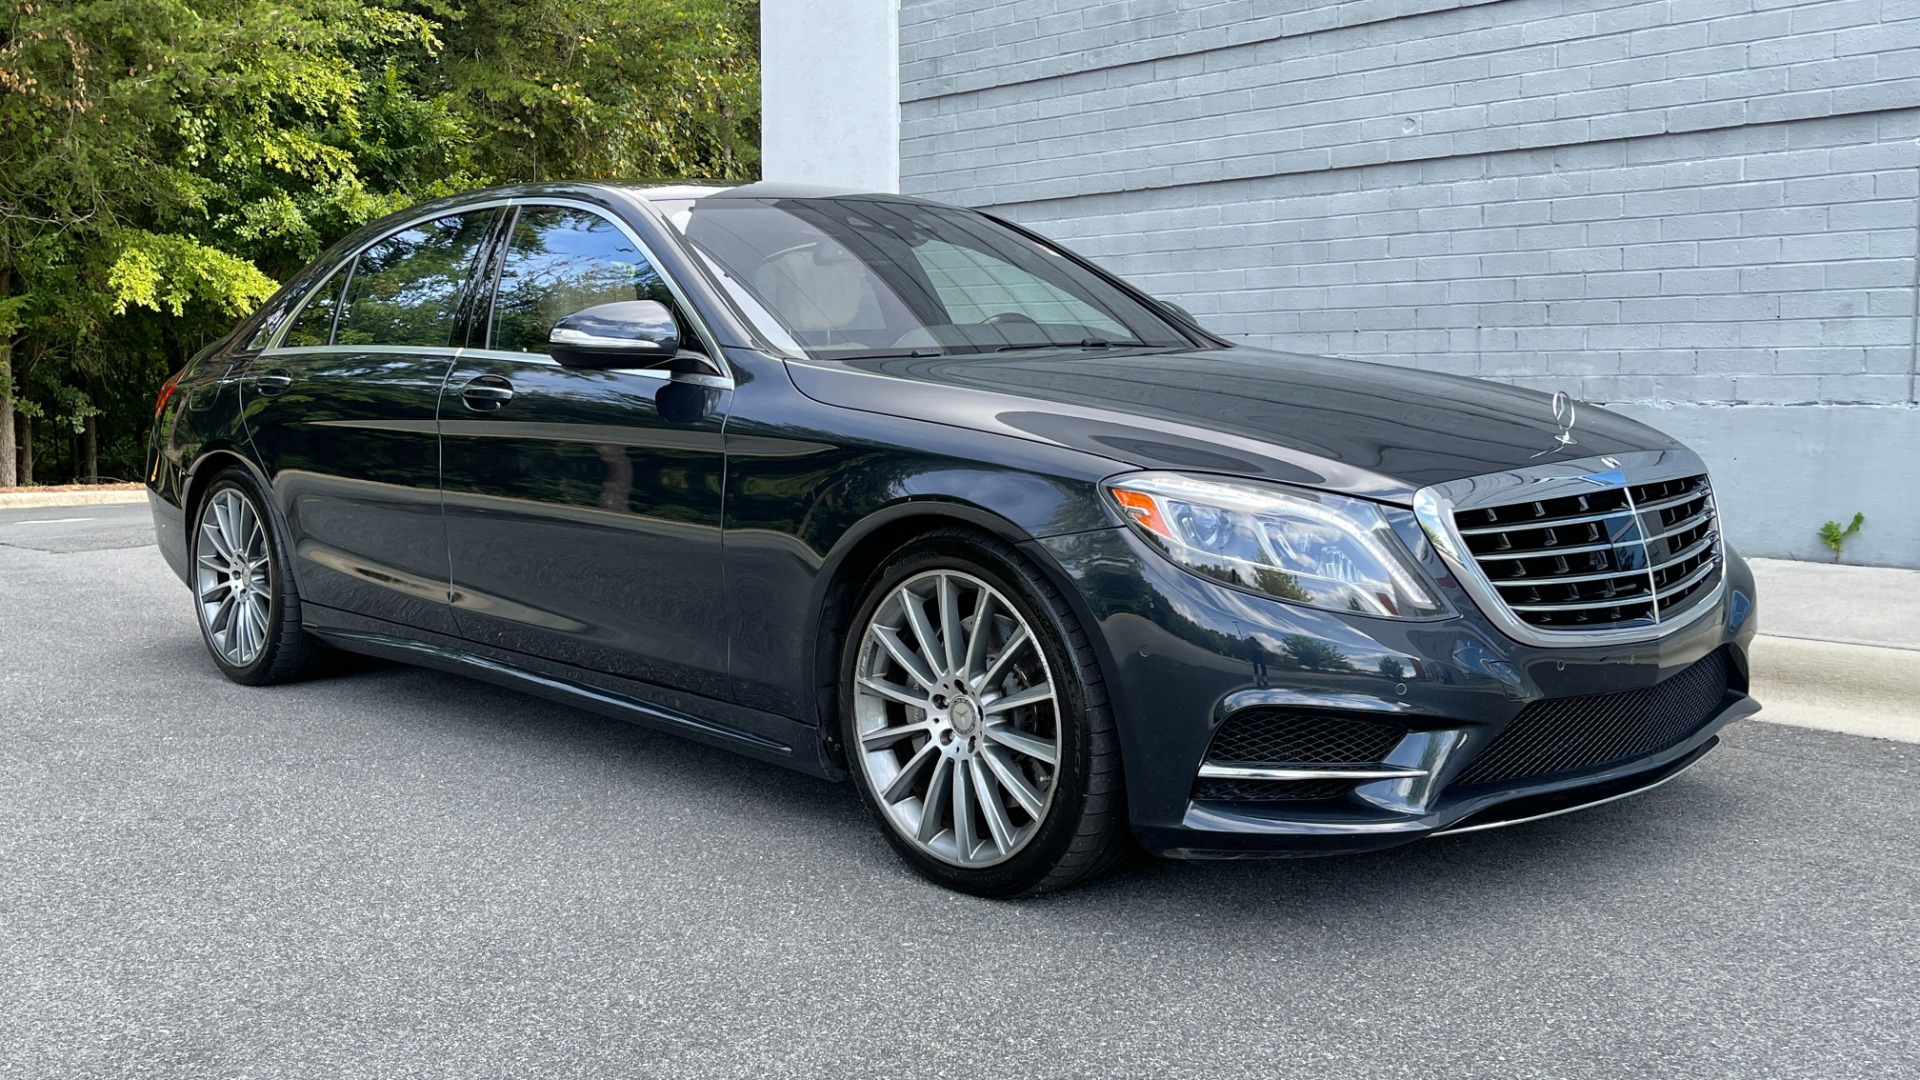 Used 2015 Mercedes-Benz S-Class S550 / REAR SEATING PACKAGE / PREMIUM / DRIVER ASSISTANCE for sale $39,995 at Formula Imports in Charlotte NC 28227 3